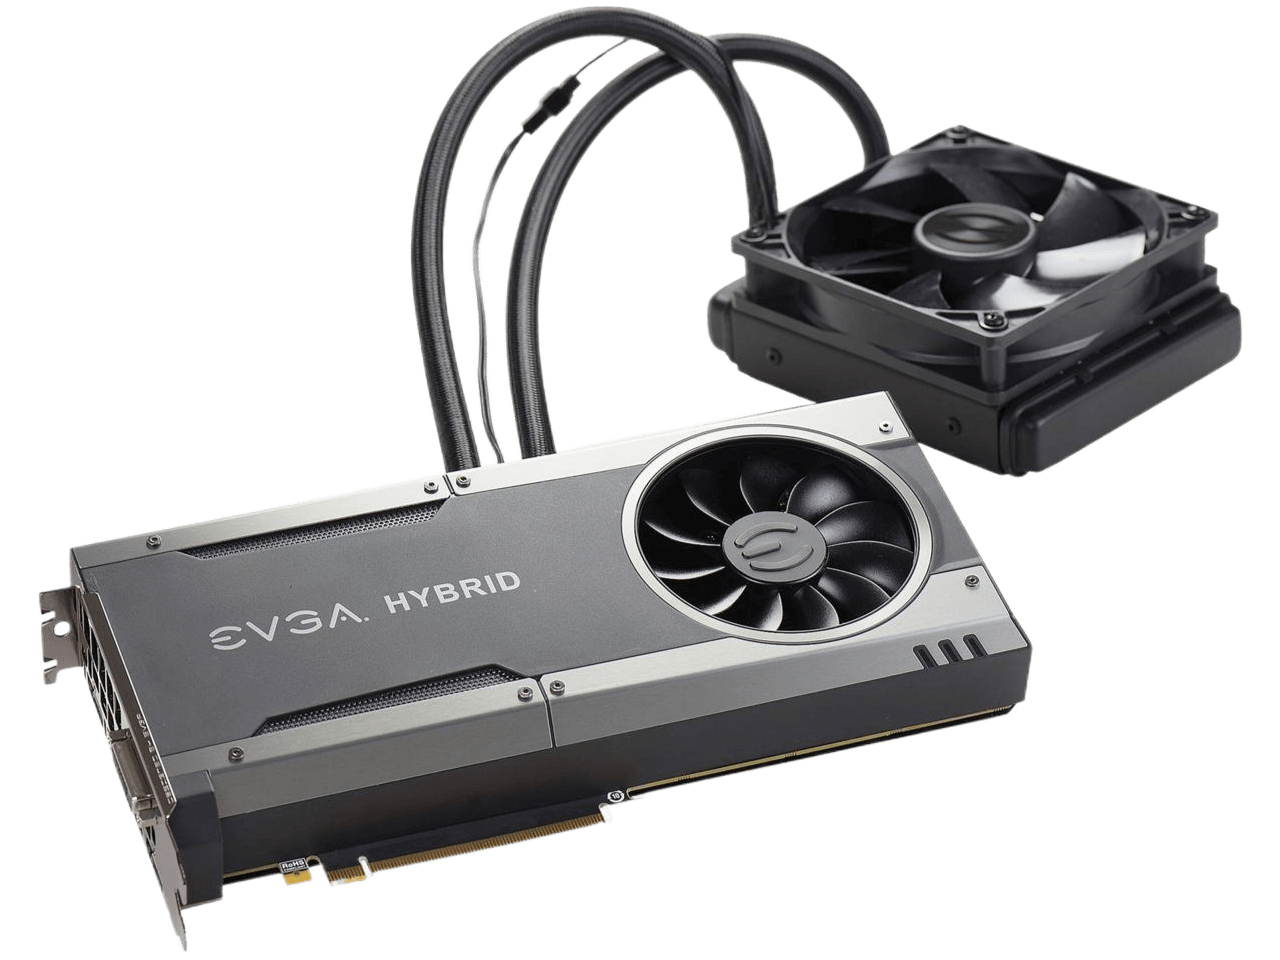 EVGA GeForce GTX 1080 FTW HYBRID GAMING 8GB GDDR5X RGB LED All-In-One Watercooling with 10CM FAN 10 Power Phases Double BIOS DX12 OSD Support (PXOC) Graphics Card 08G-P4-6288-KR